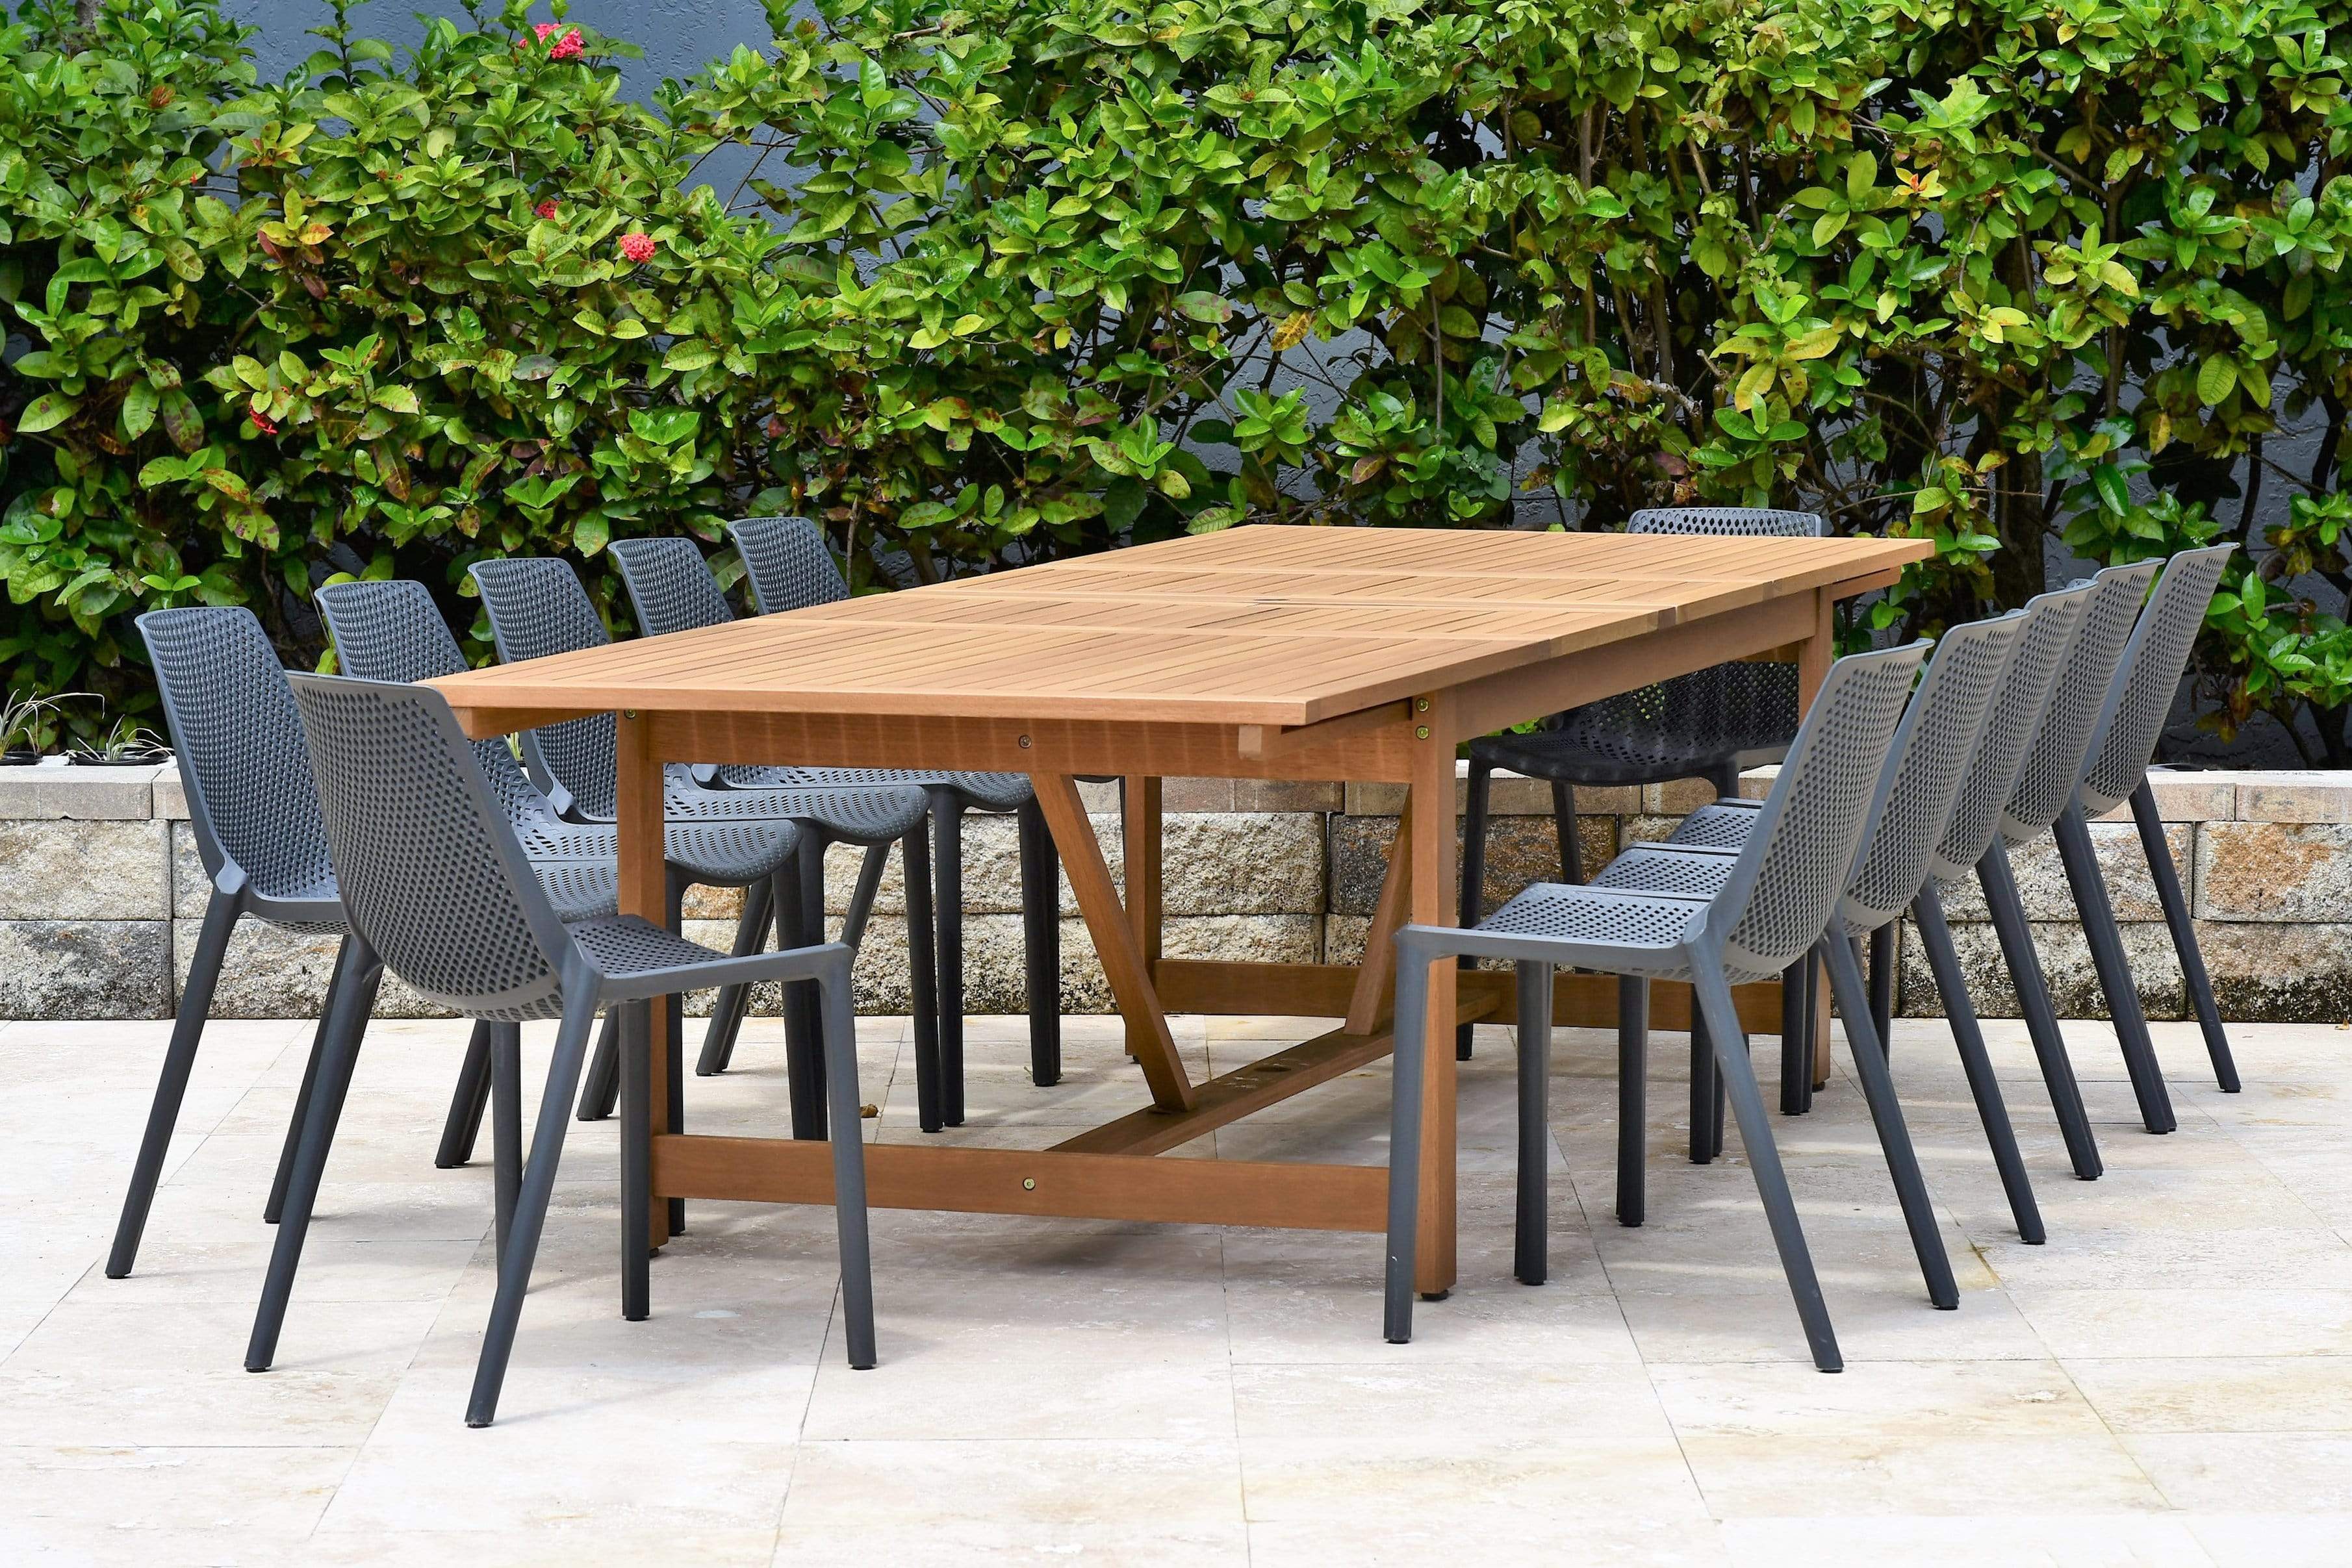 Amazonia Outdoor Teak Dining Set Amazonia Sequoia 13 Piece Eucalyptus Patio Dining Set | Teak Finish Table with Grey Resin Chairs| Durable and Ideal for Outdoors